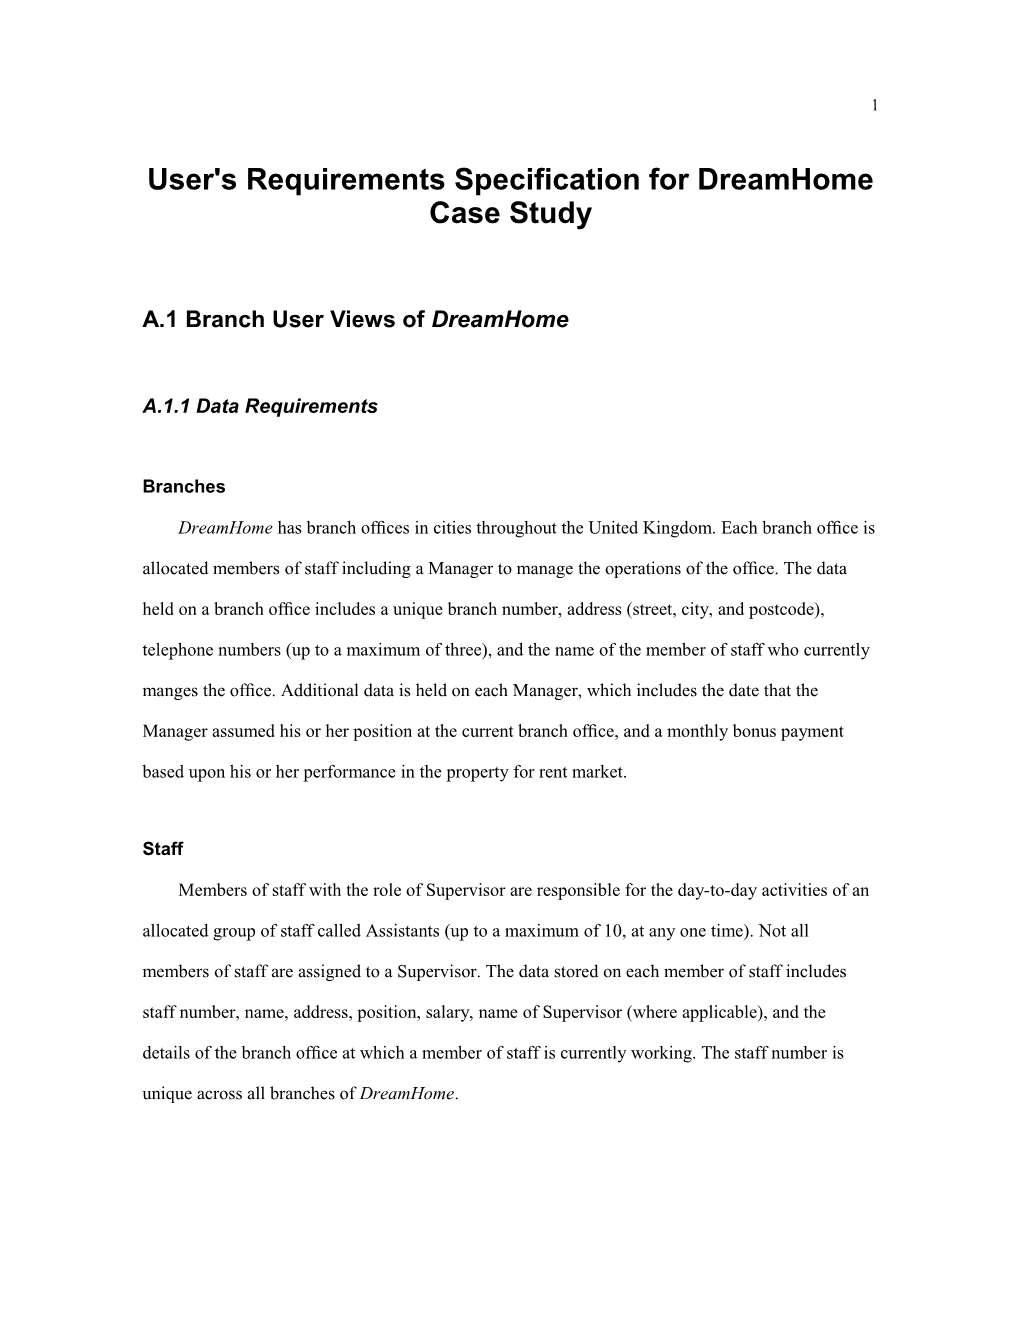 User's Requirements Specification for Dreamhome Case Study